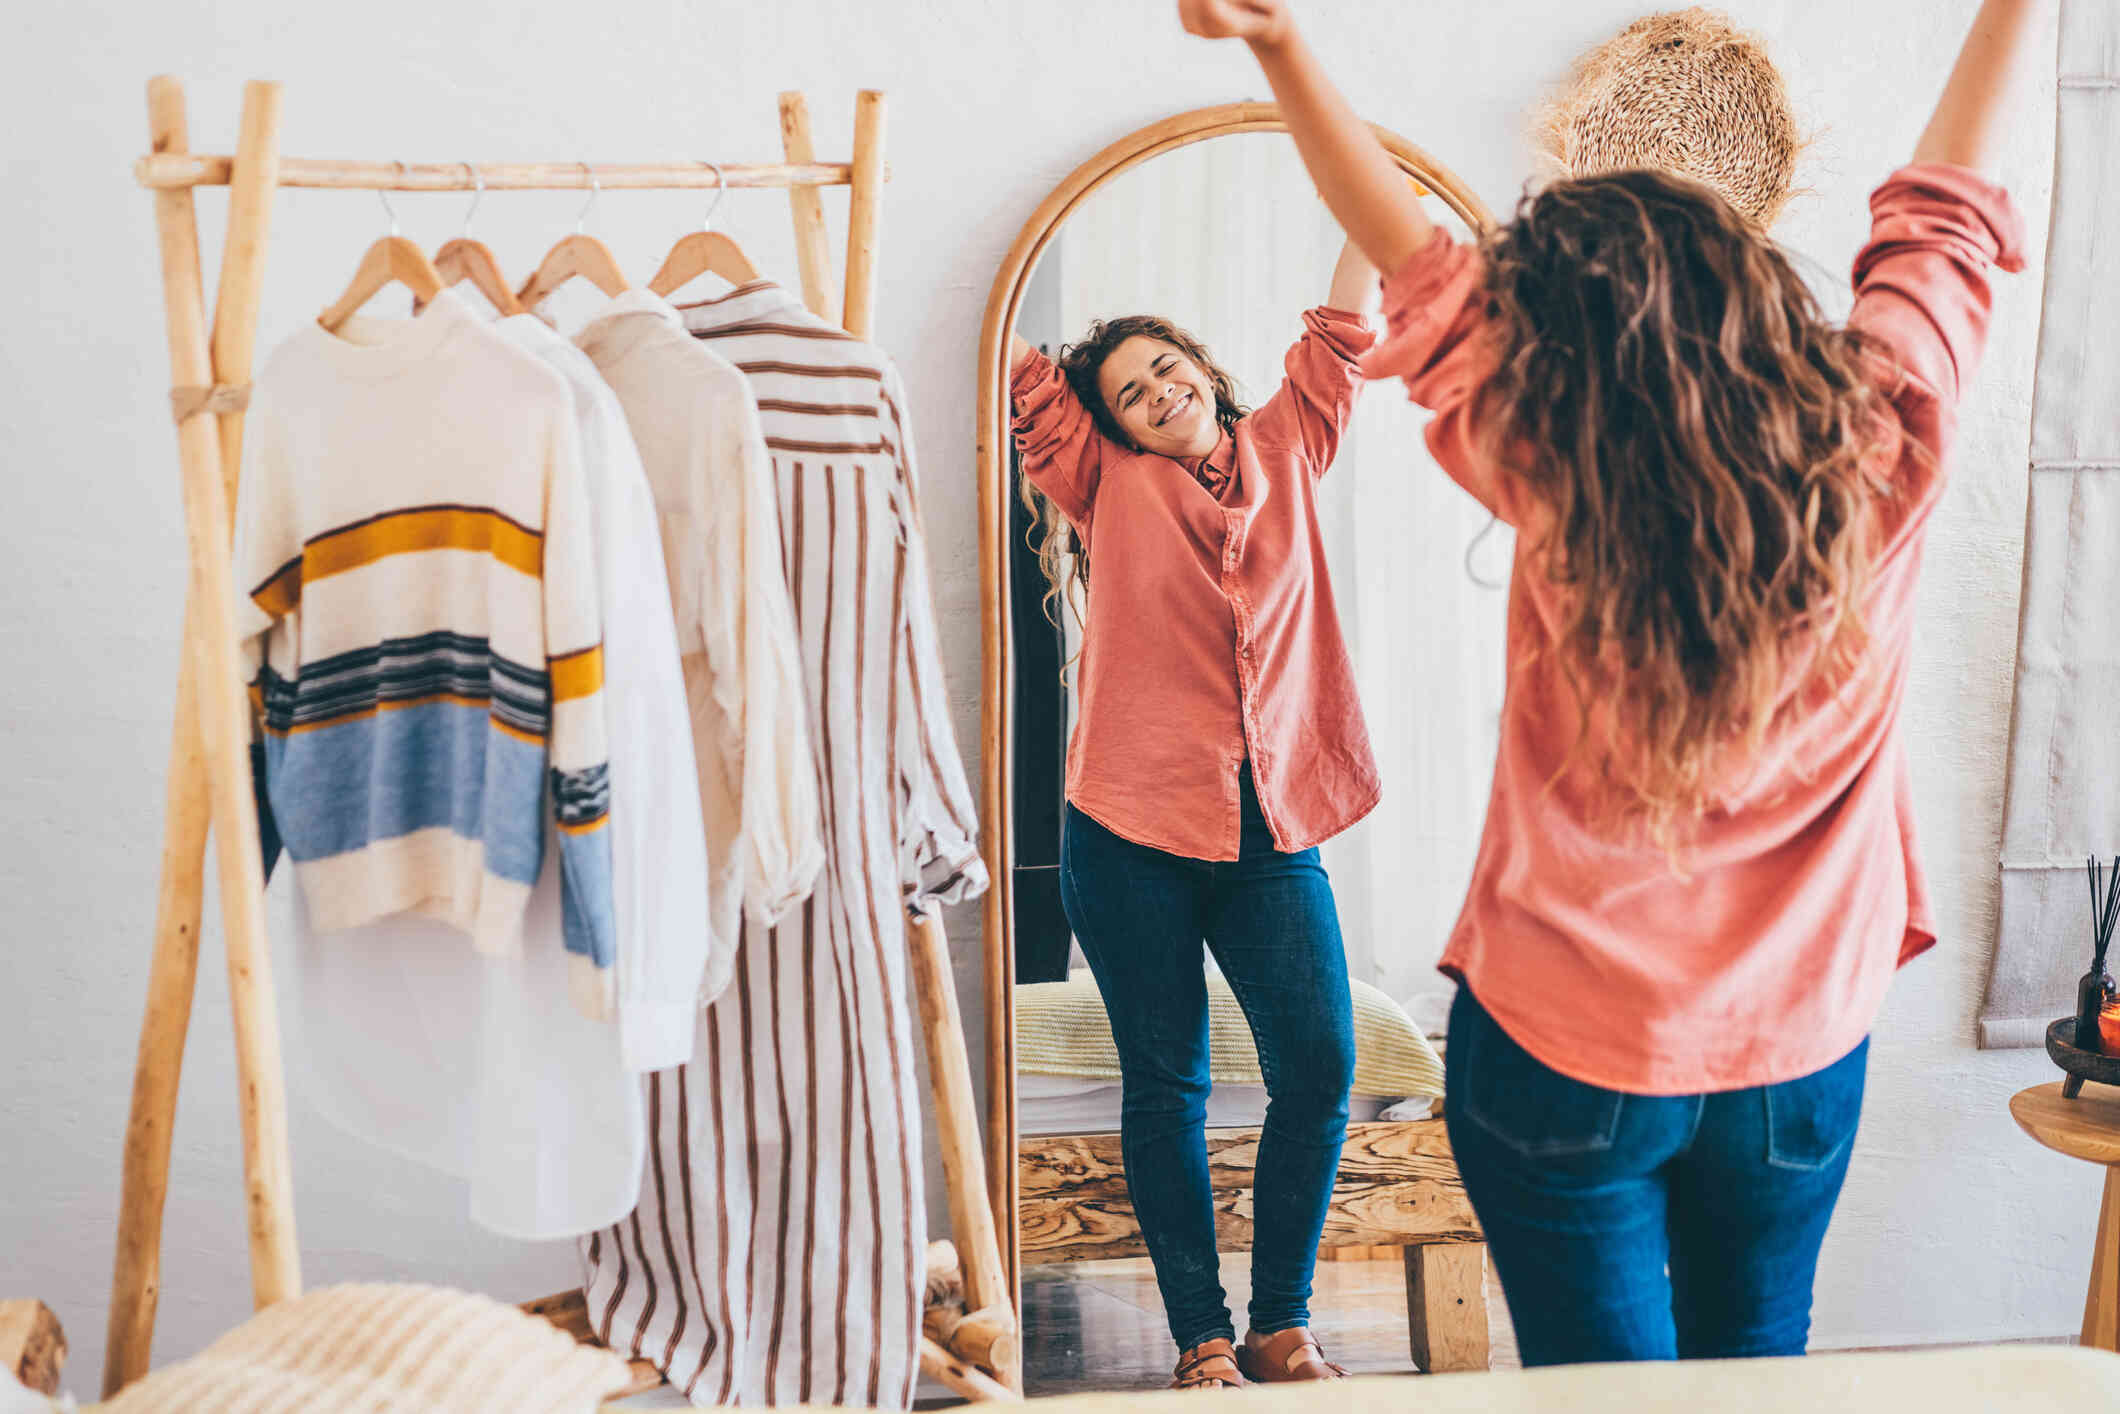 A woman in a button down shirt raises her arms happy as she looks in the full length mirror while standing next to a rack of clothes.